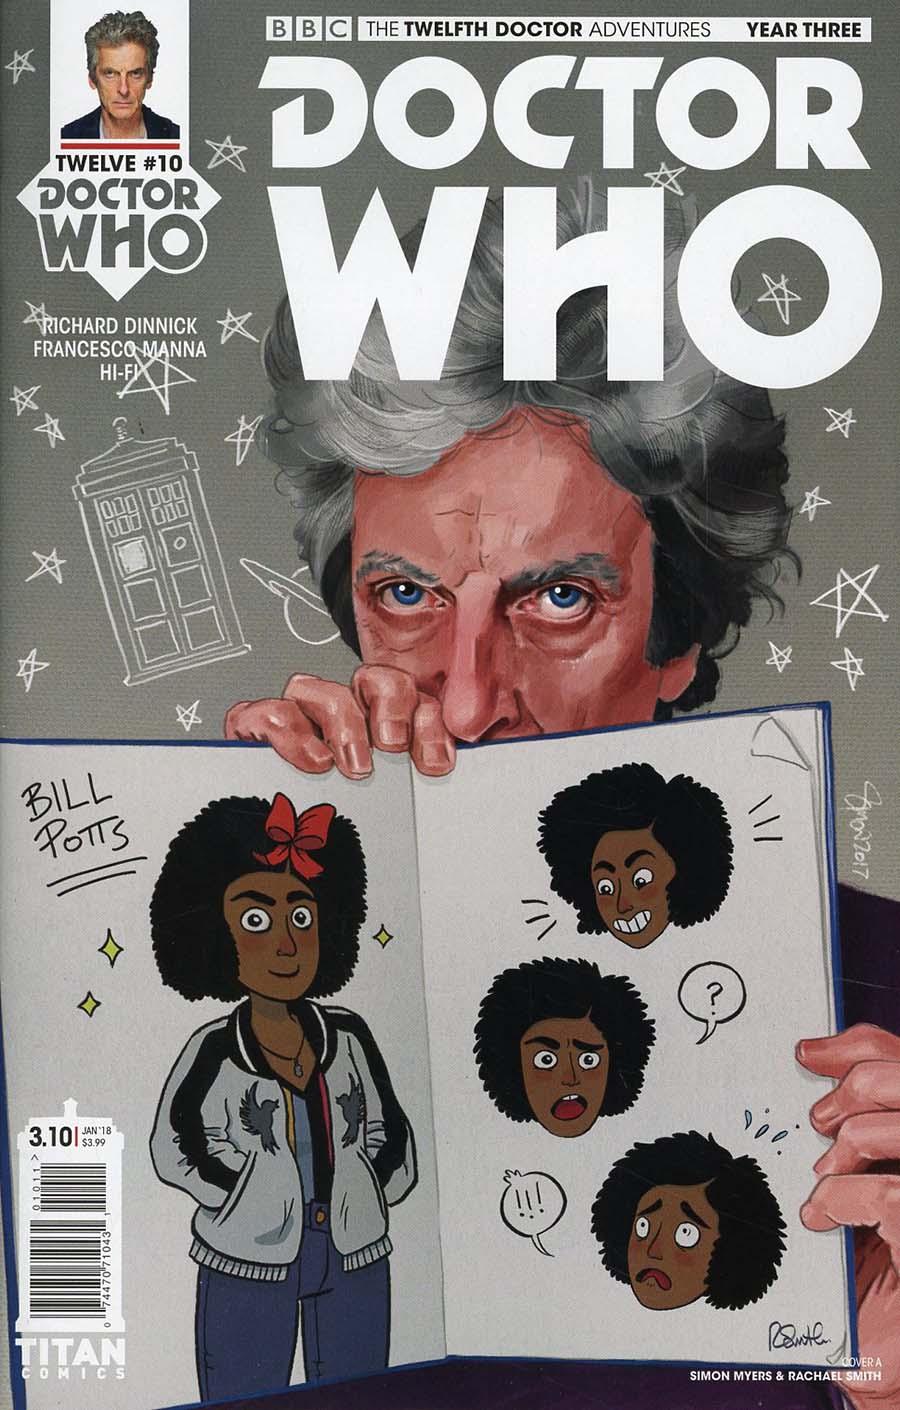 Doctor Who 12th Doctor Year Three Vol. 1 #10